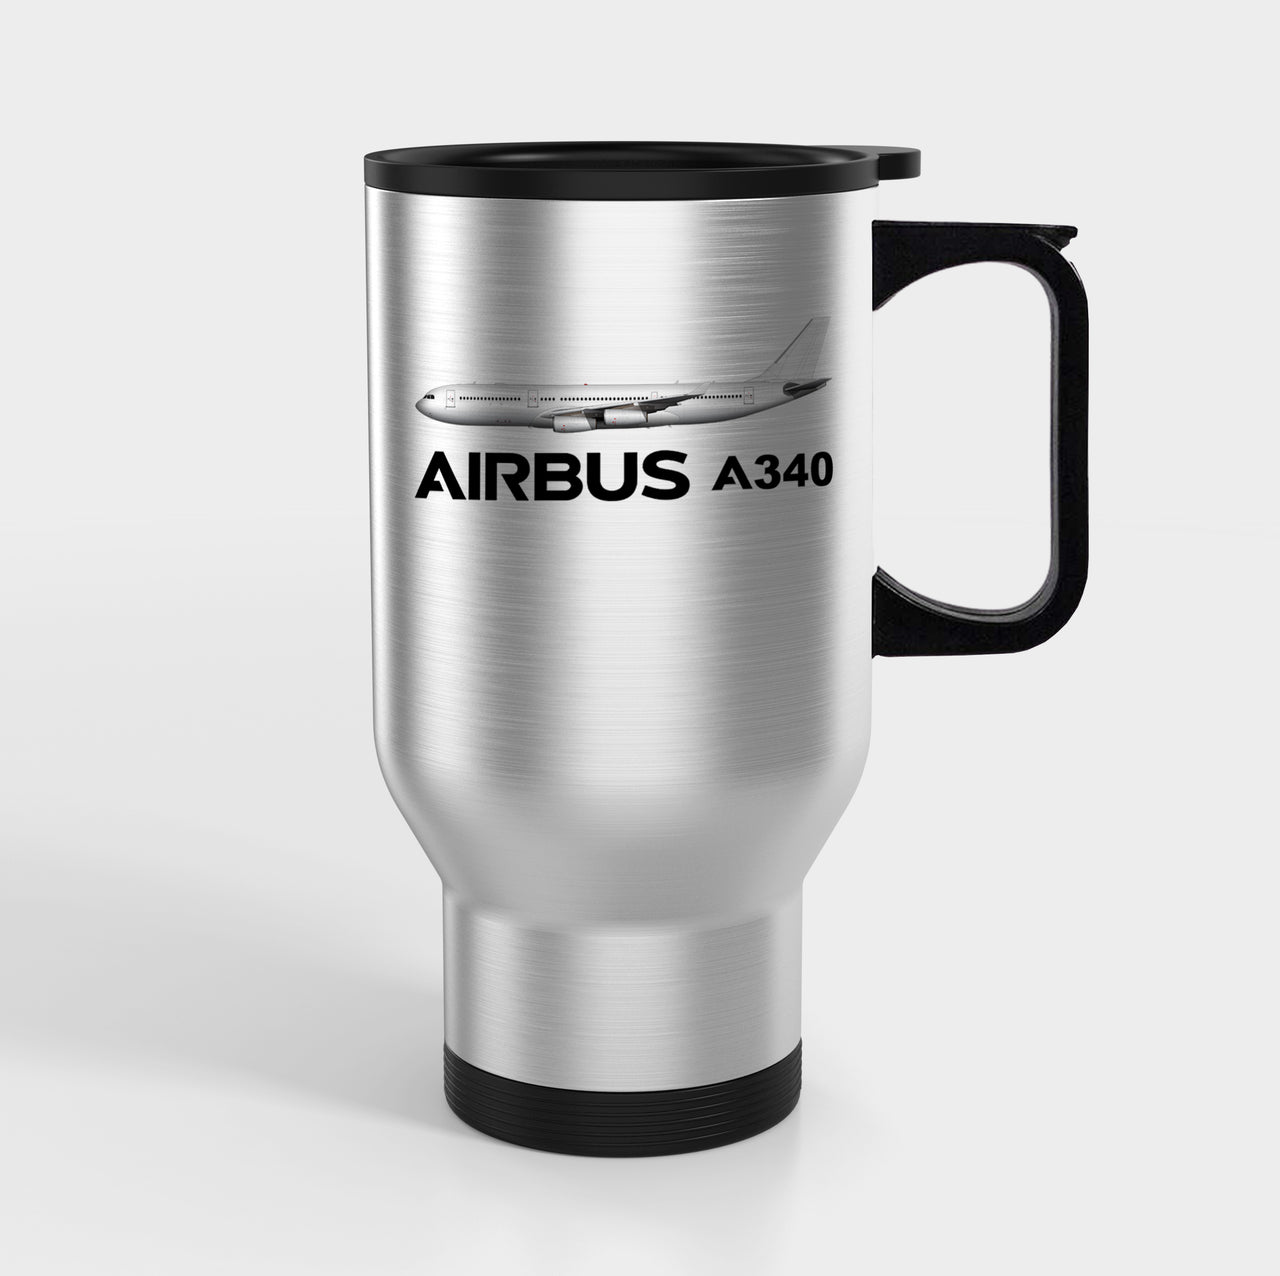 The Airbus A340 Designed Travel Mugs (With Holder)